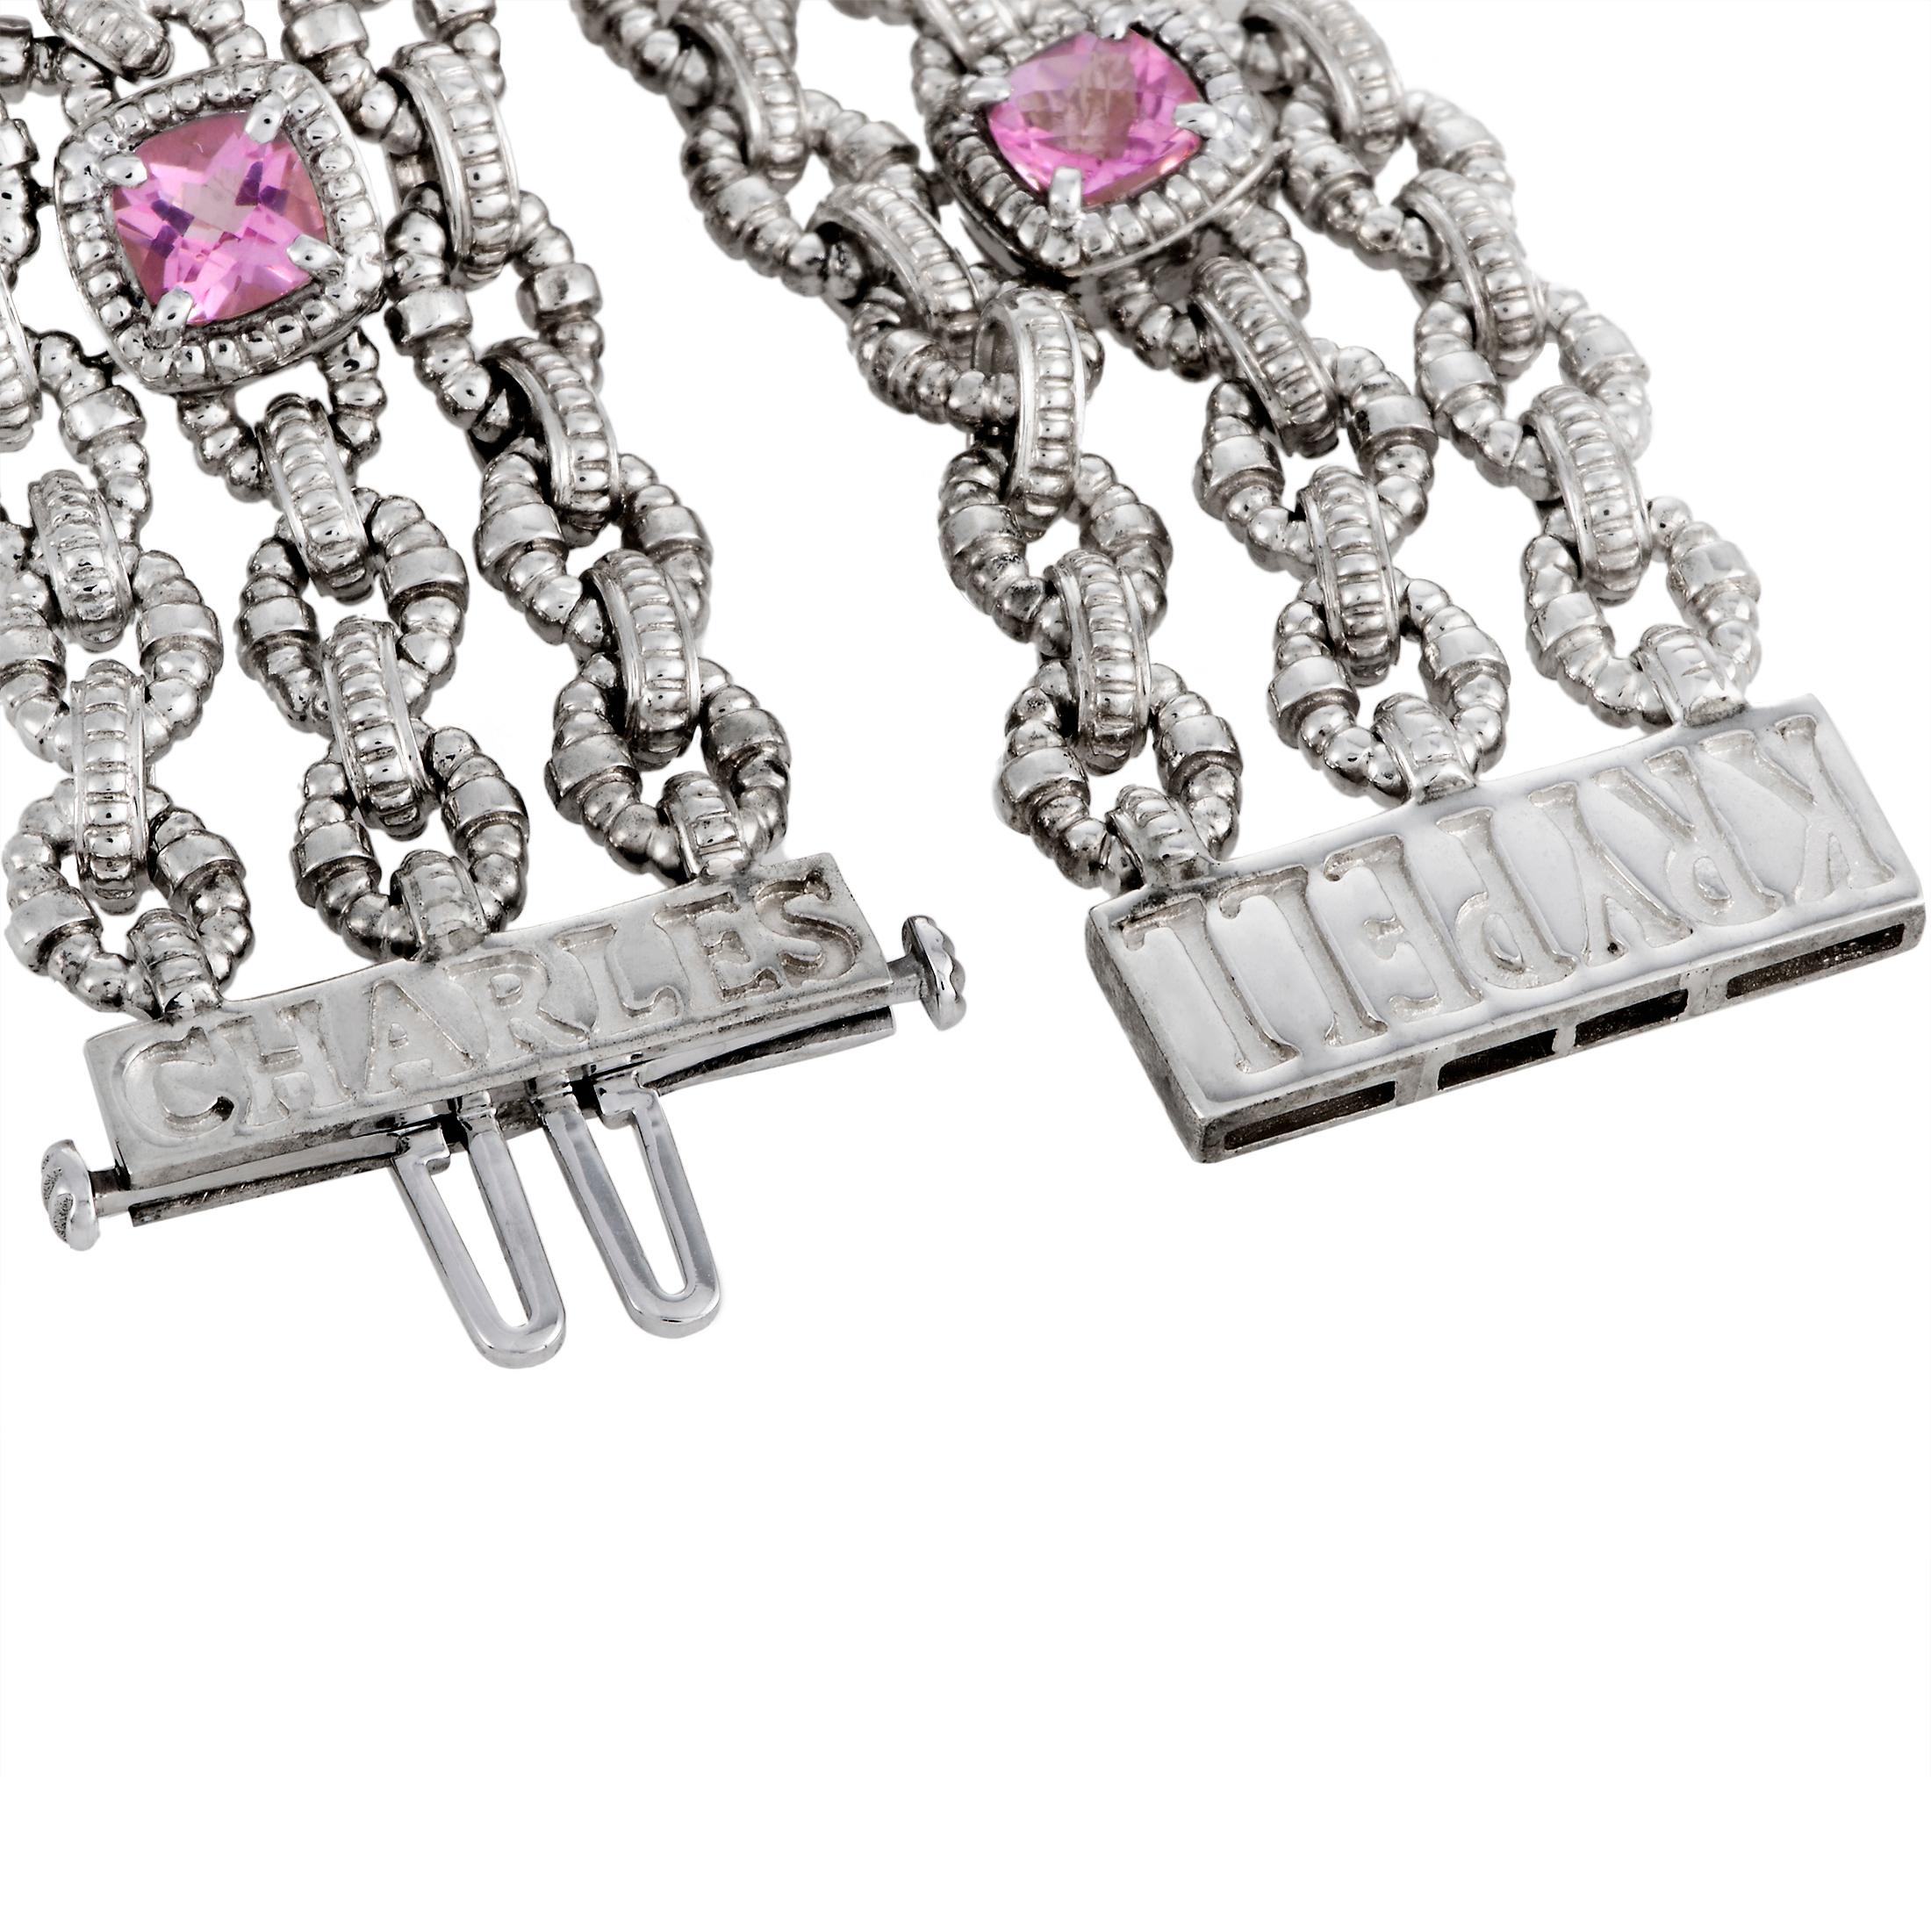 This Charles Krypell bracelet is crafted from 14K white gold and silver and decorated with pink tourmalines. The bracelet weighs 64 grams and measures 7.50” in length.

Offered in brand new condition, this jewelry piece includes a gift box.